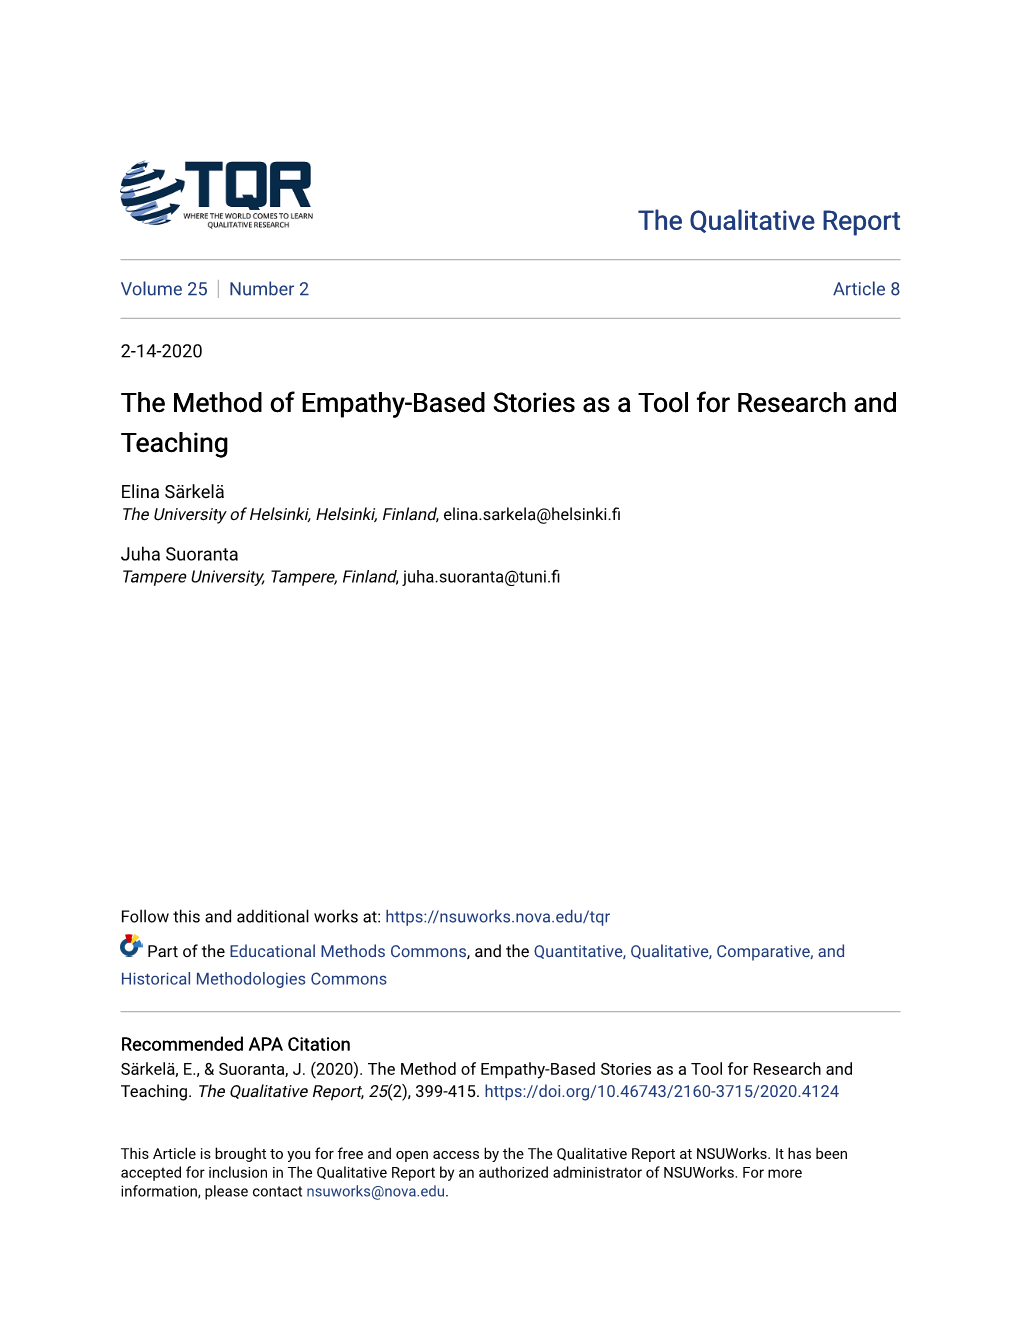 The Method of Empathy-Based Stories As a Tool for Research and Teaching